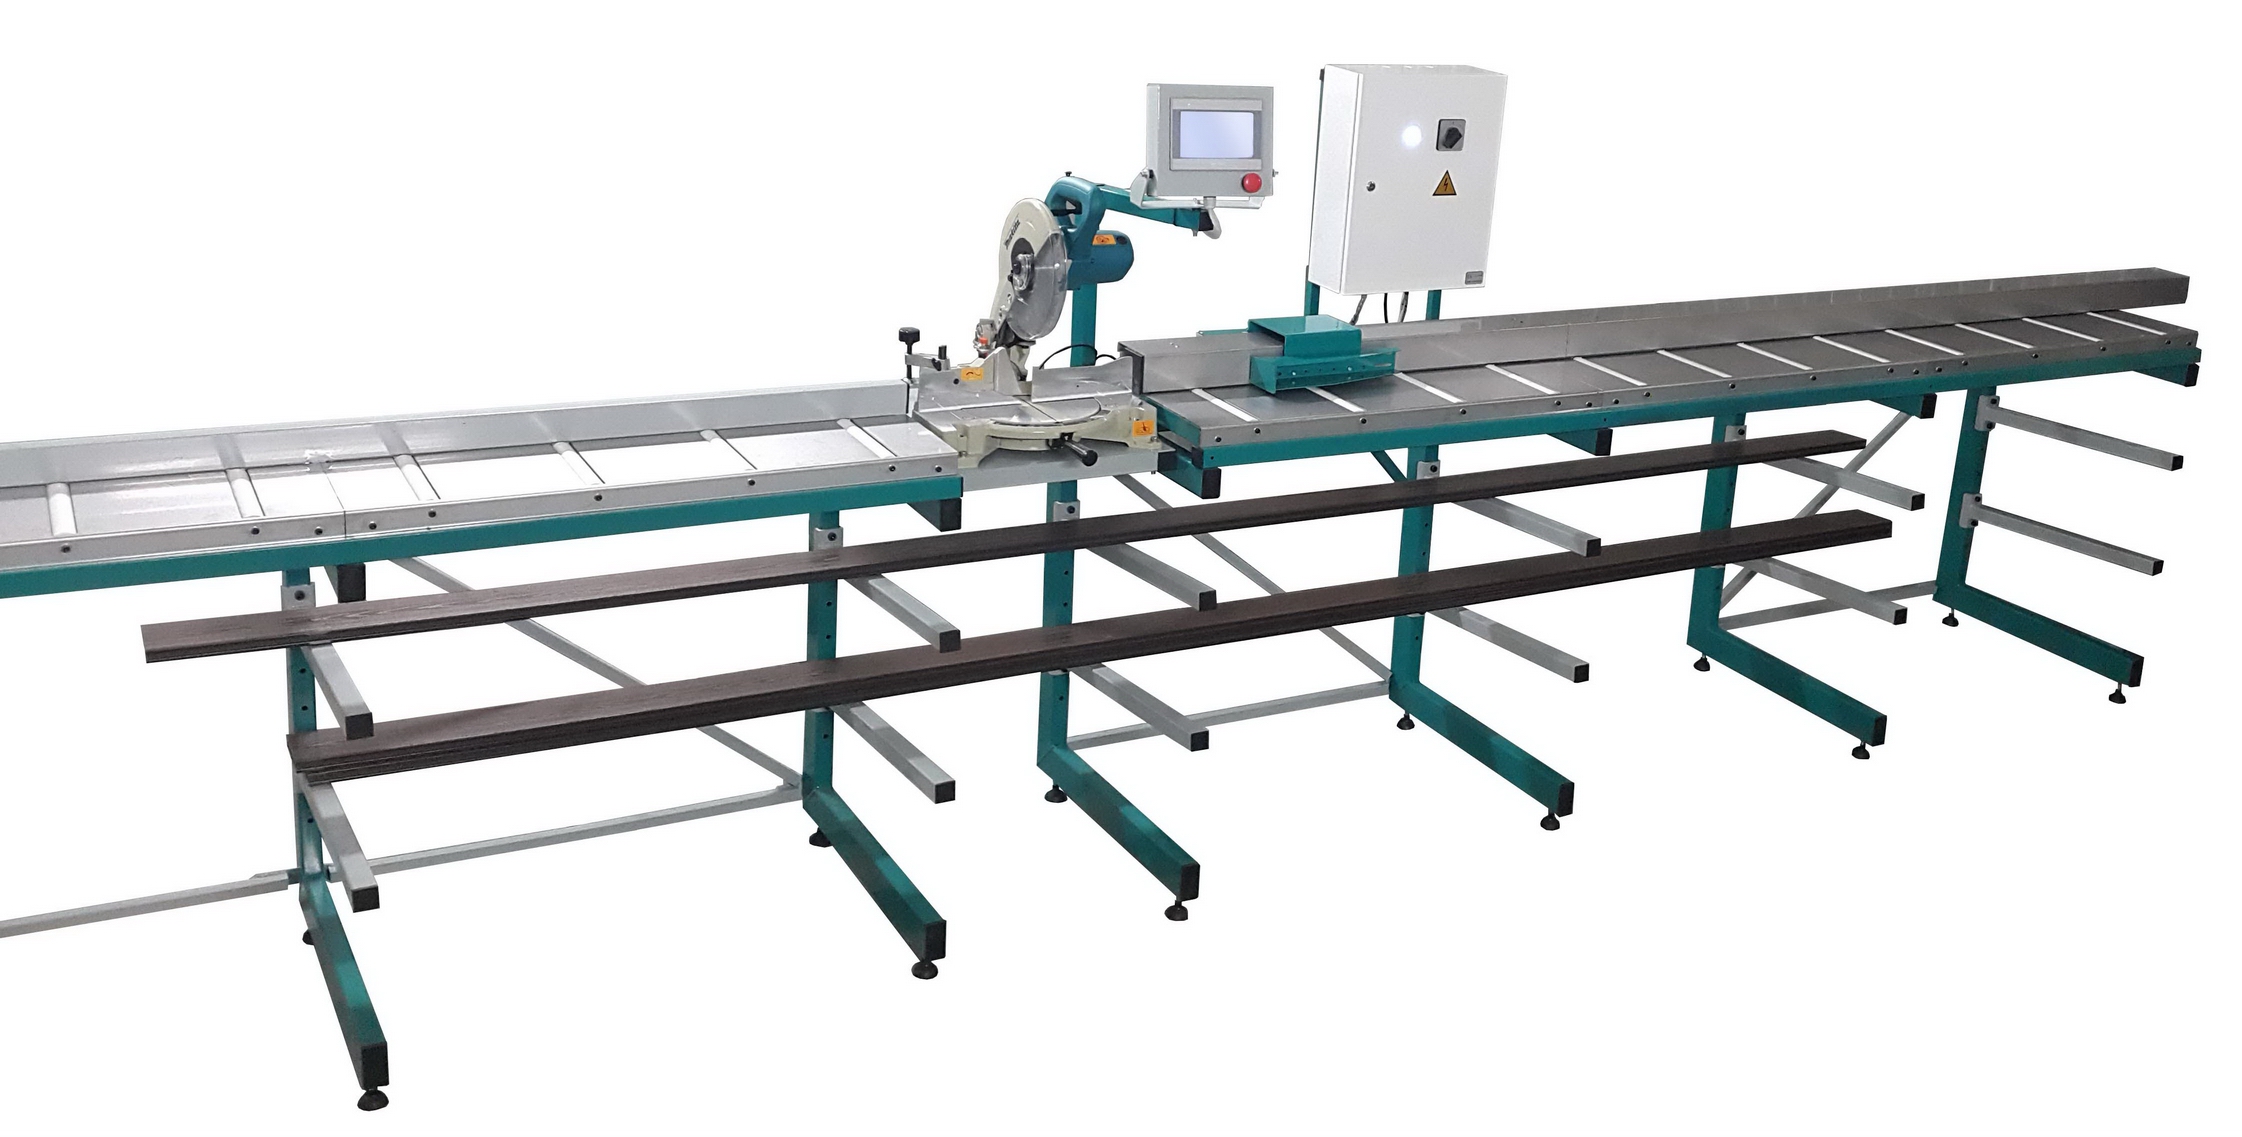 Automatic positioning system with stop for table saw